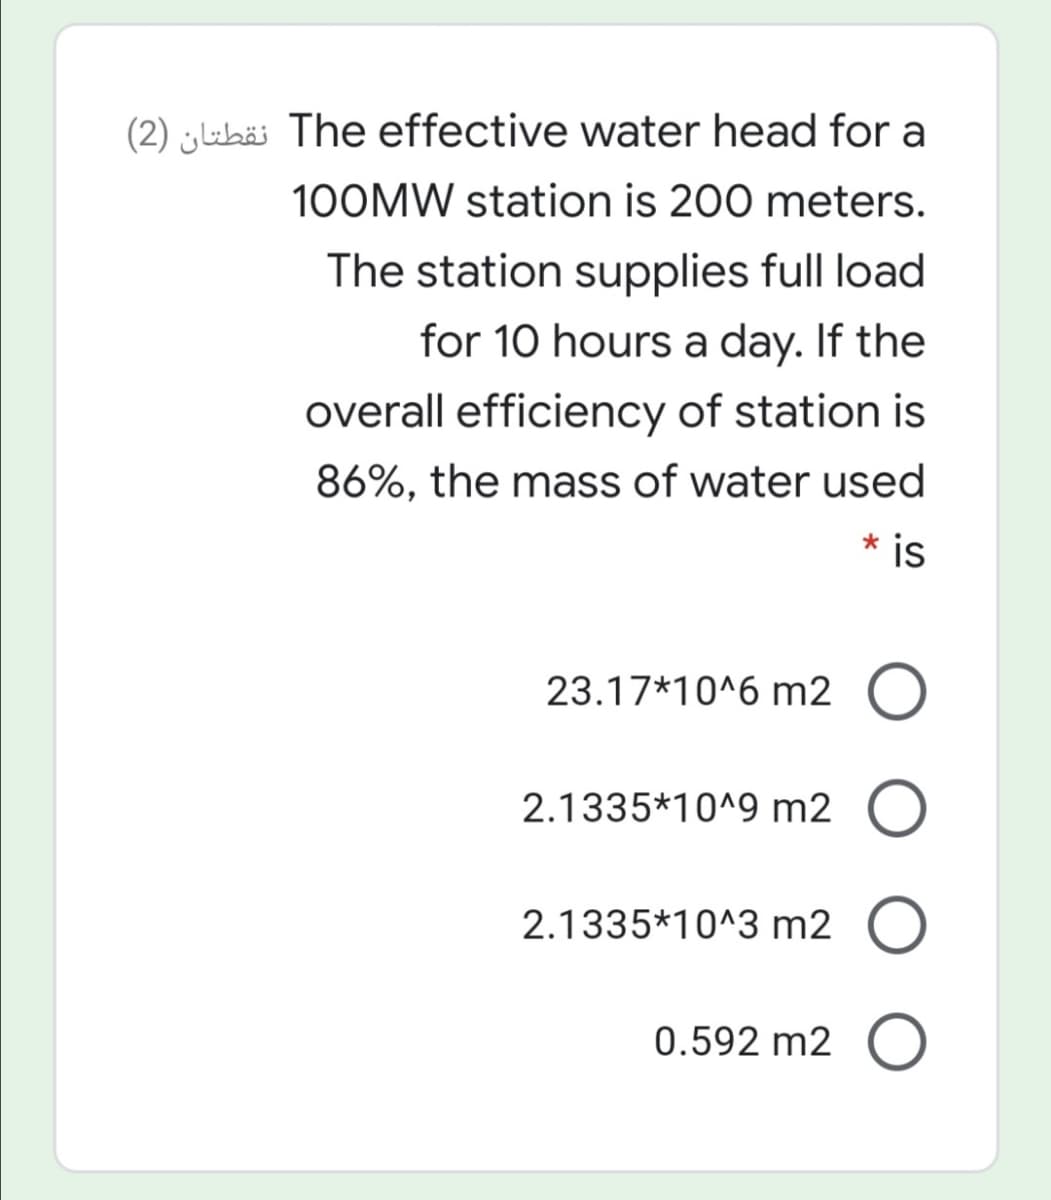 (2) uhä The effective water head for a
100MW station is 200 meters.
The station supplies full load
for 10 hours a day. If the
overall efficiency of station is
86%, the mass of water used
* is
23.17*10^6 m2 O
2.1335*10^9 m2 O
2.1335*10^3 m2 O
0.592 m2 O
